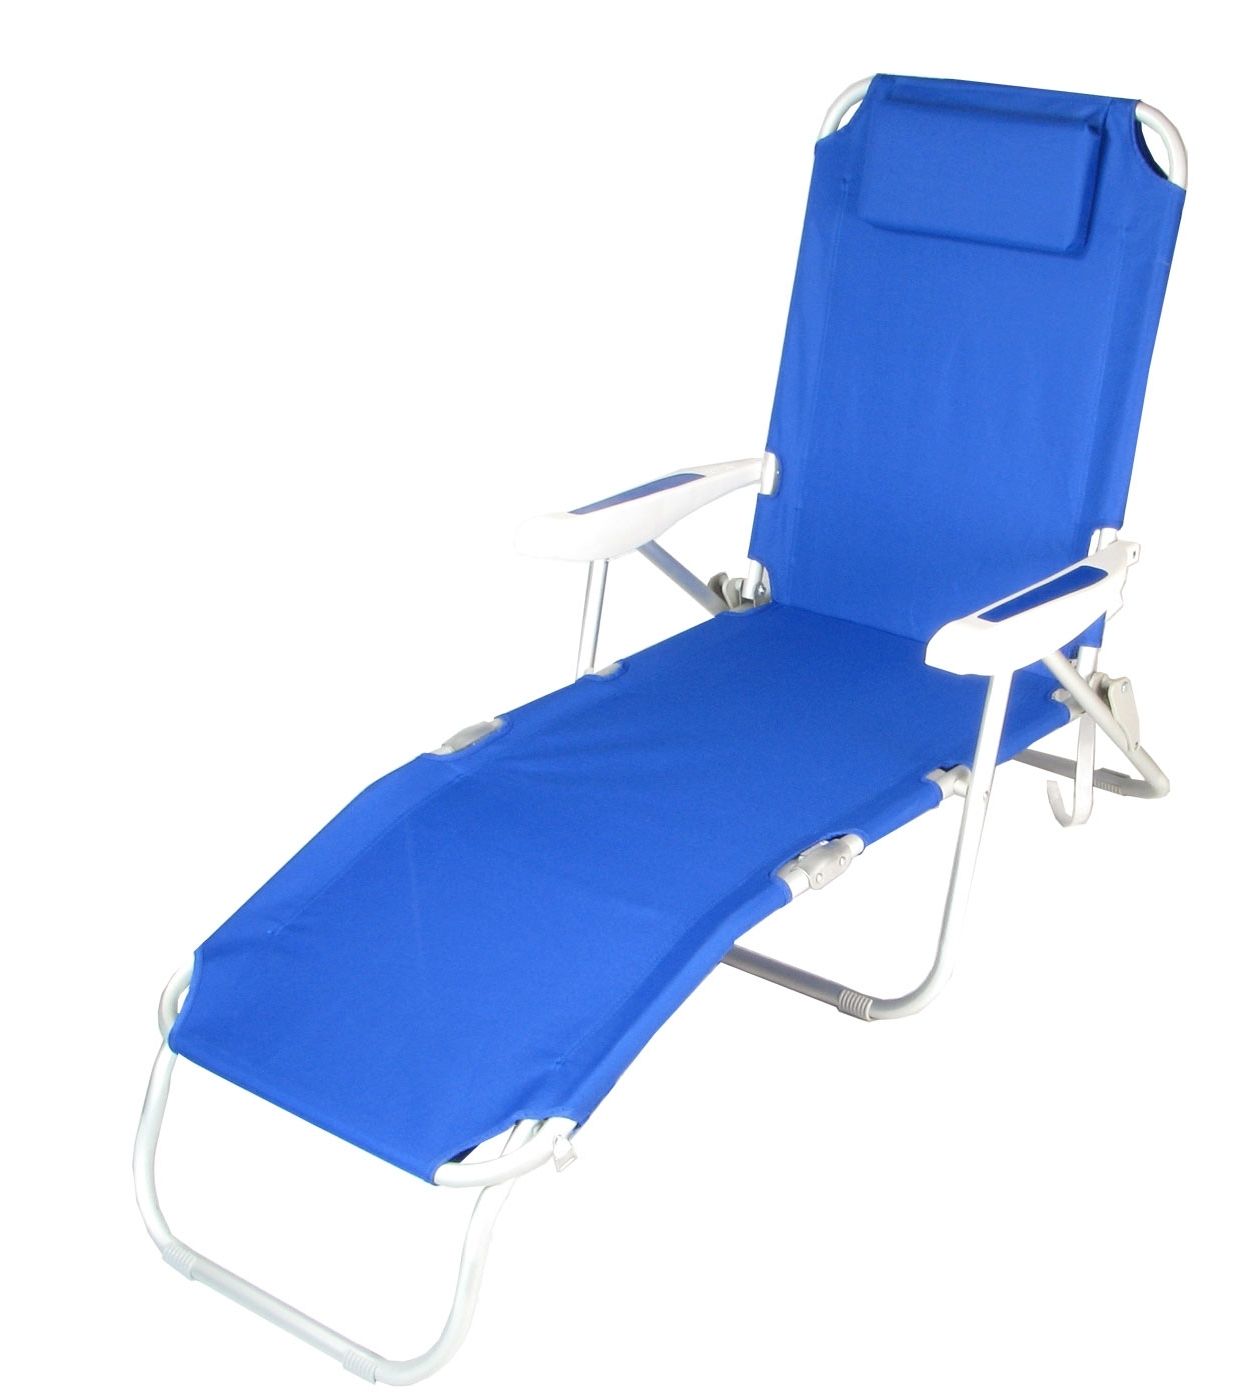 Beach Chaise Lounge Chairs Intended For Well Liked Beach Chaise Lounge Chair Amazon Com Ostrich Garden Outdoor  (View 10 of 15)